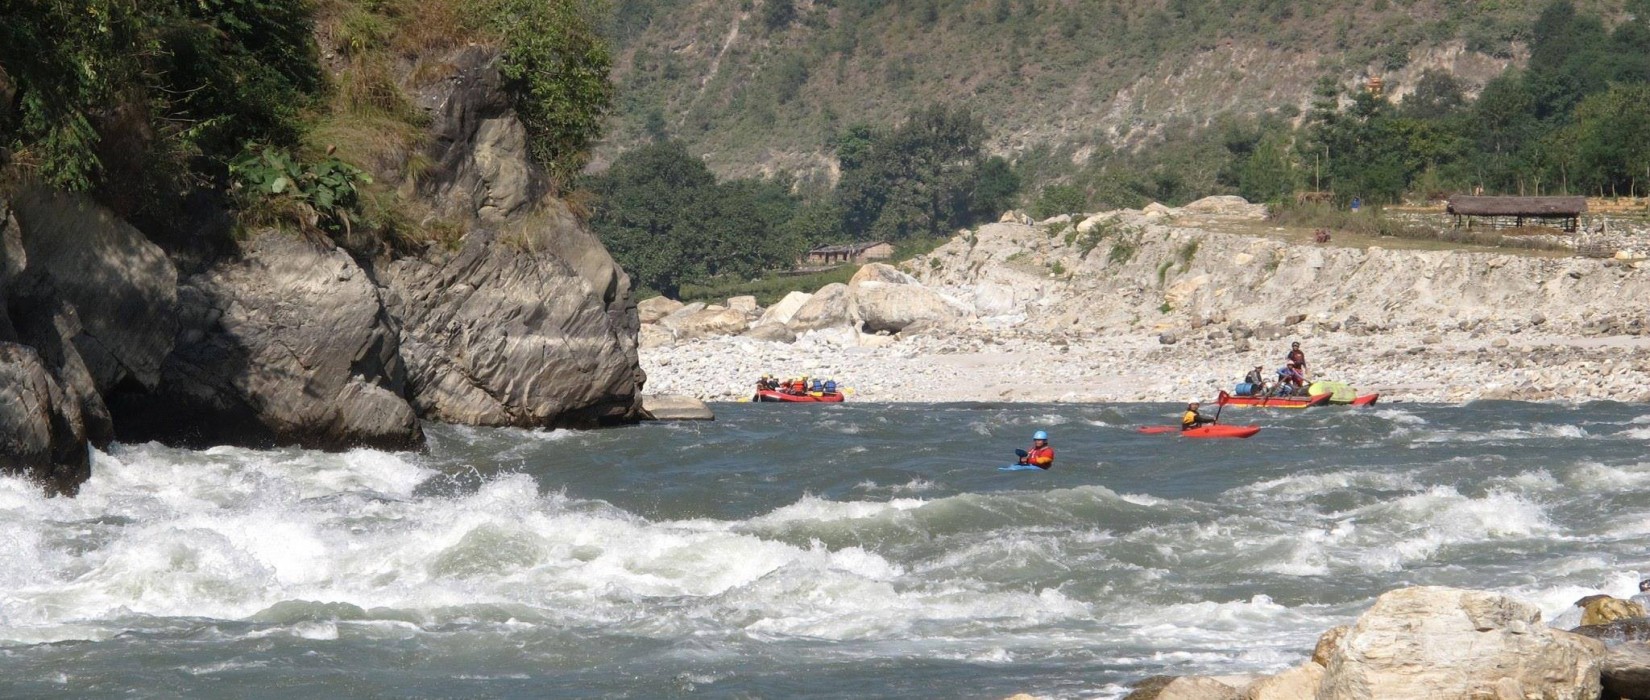 Rafting in the Himalayas Rivers